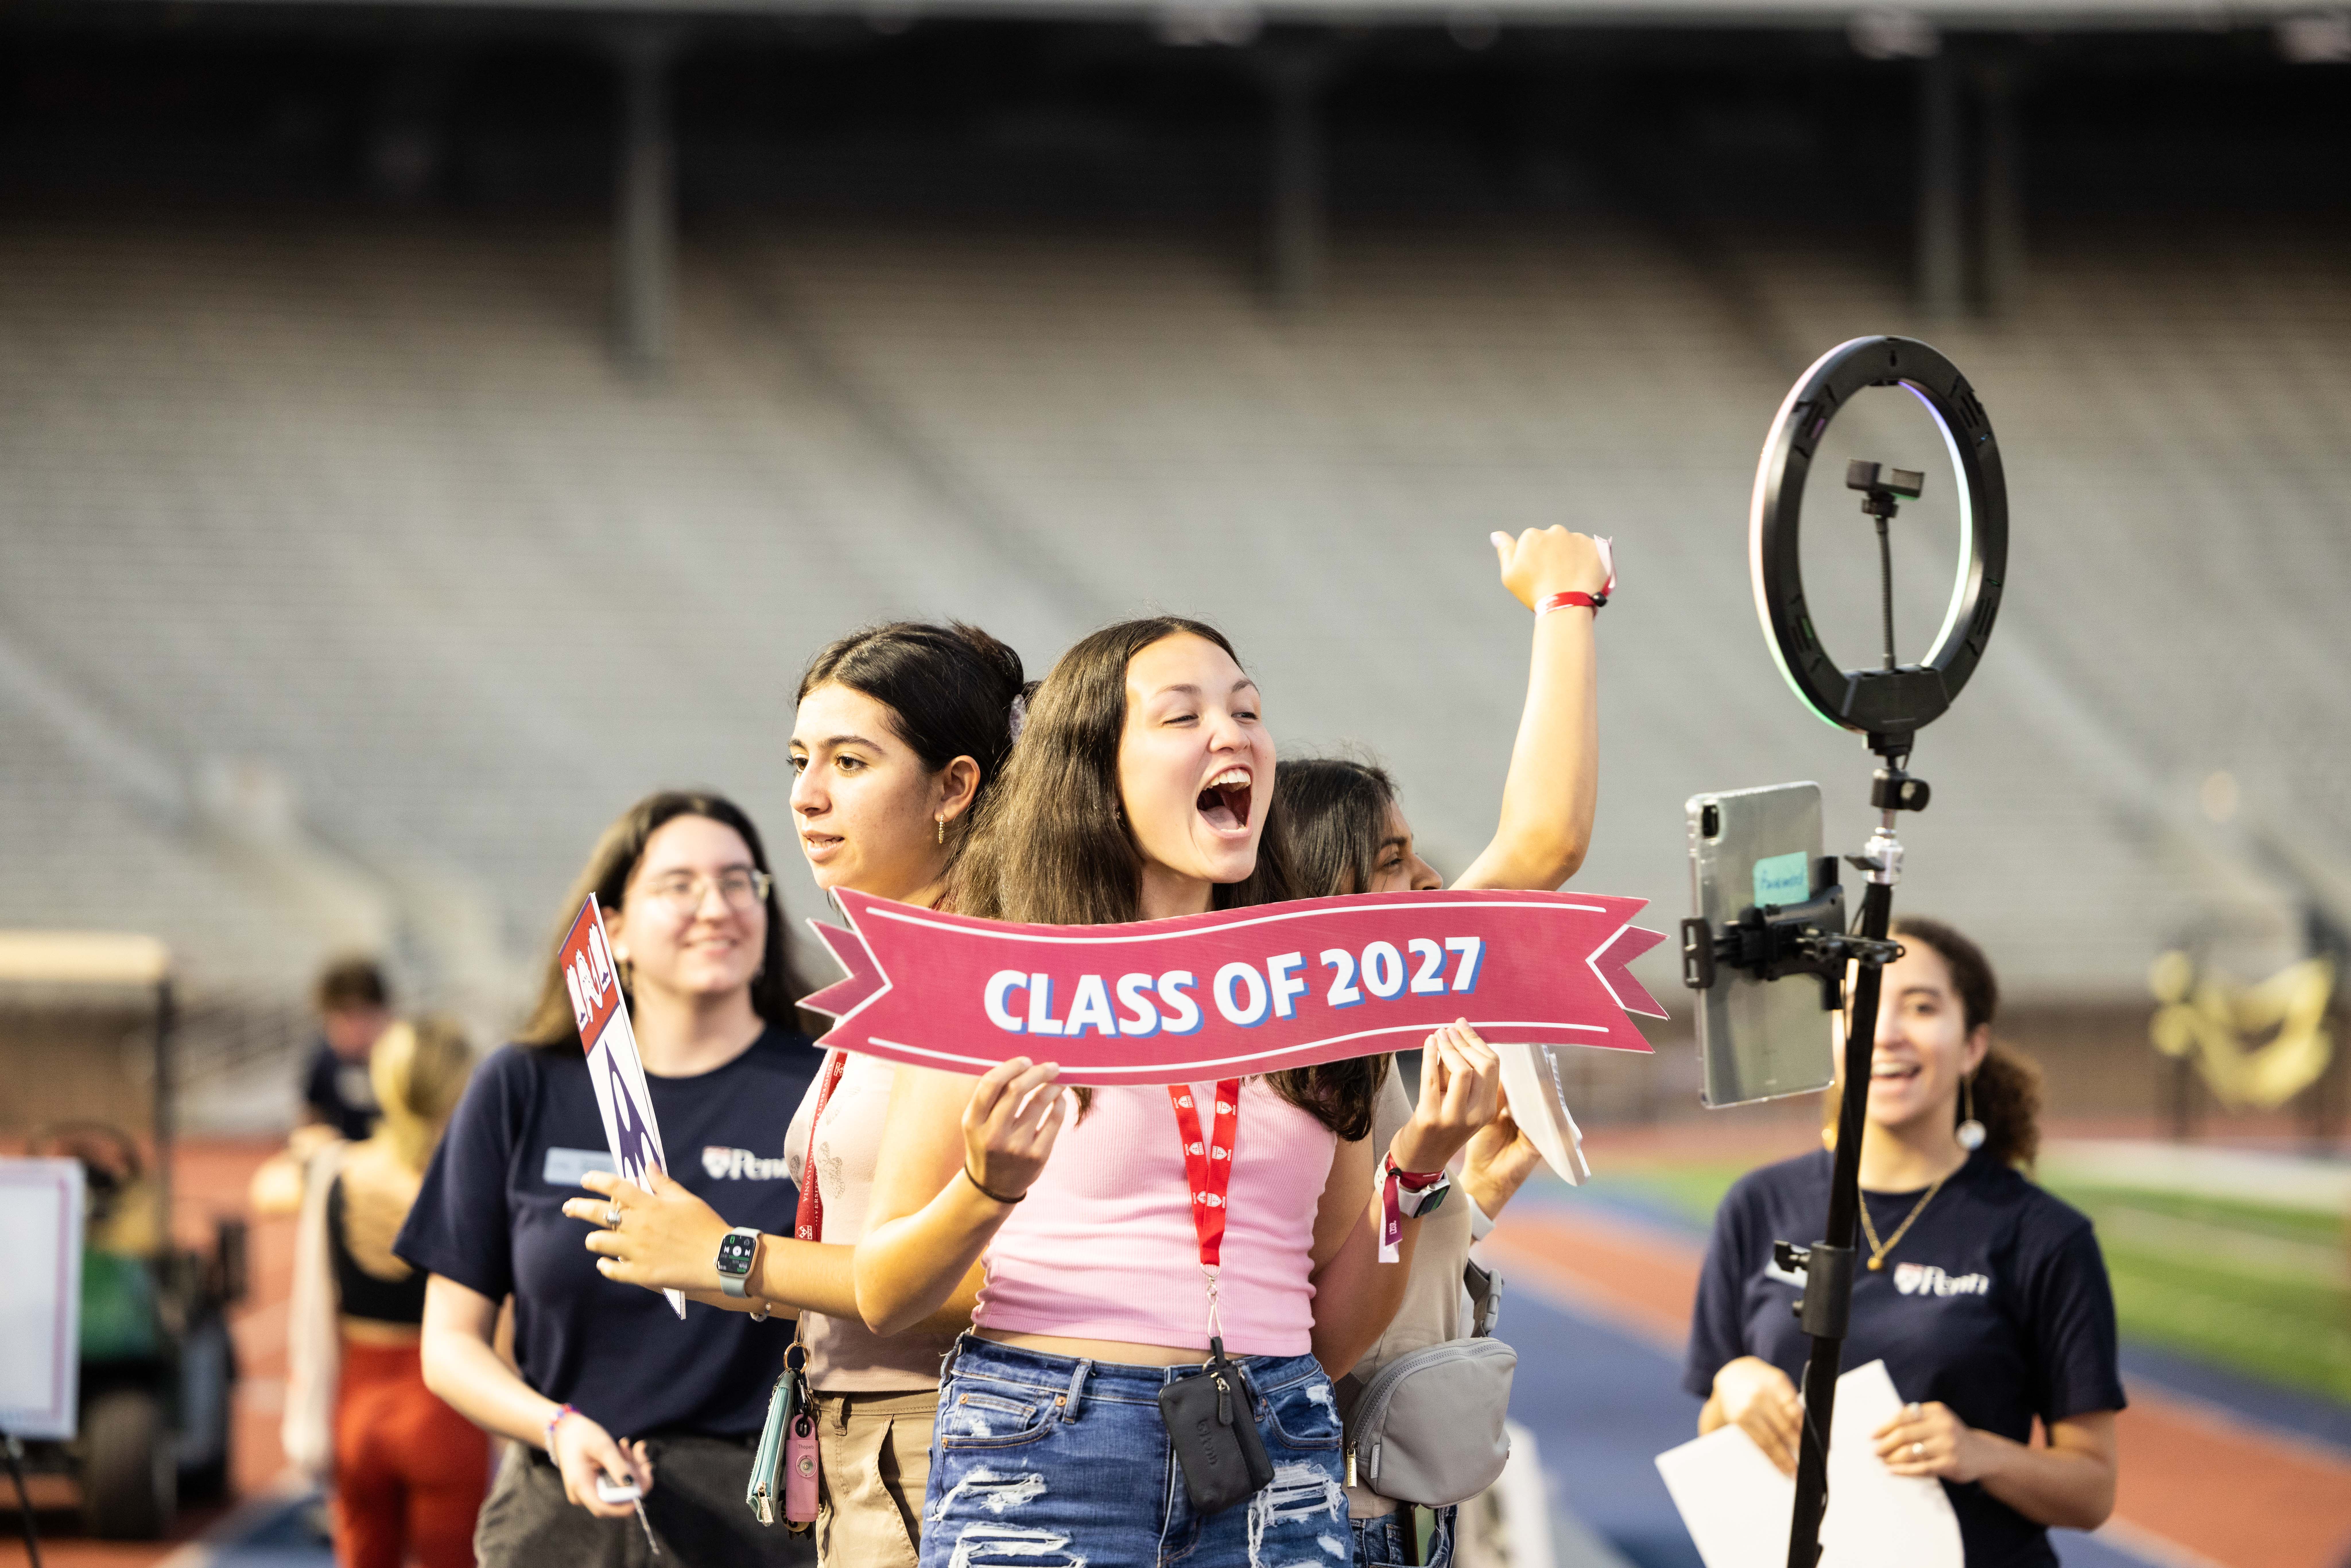 A woman holding a sign reading "Class of 2027" cheers while speaking into a camera